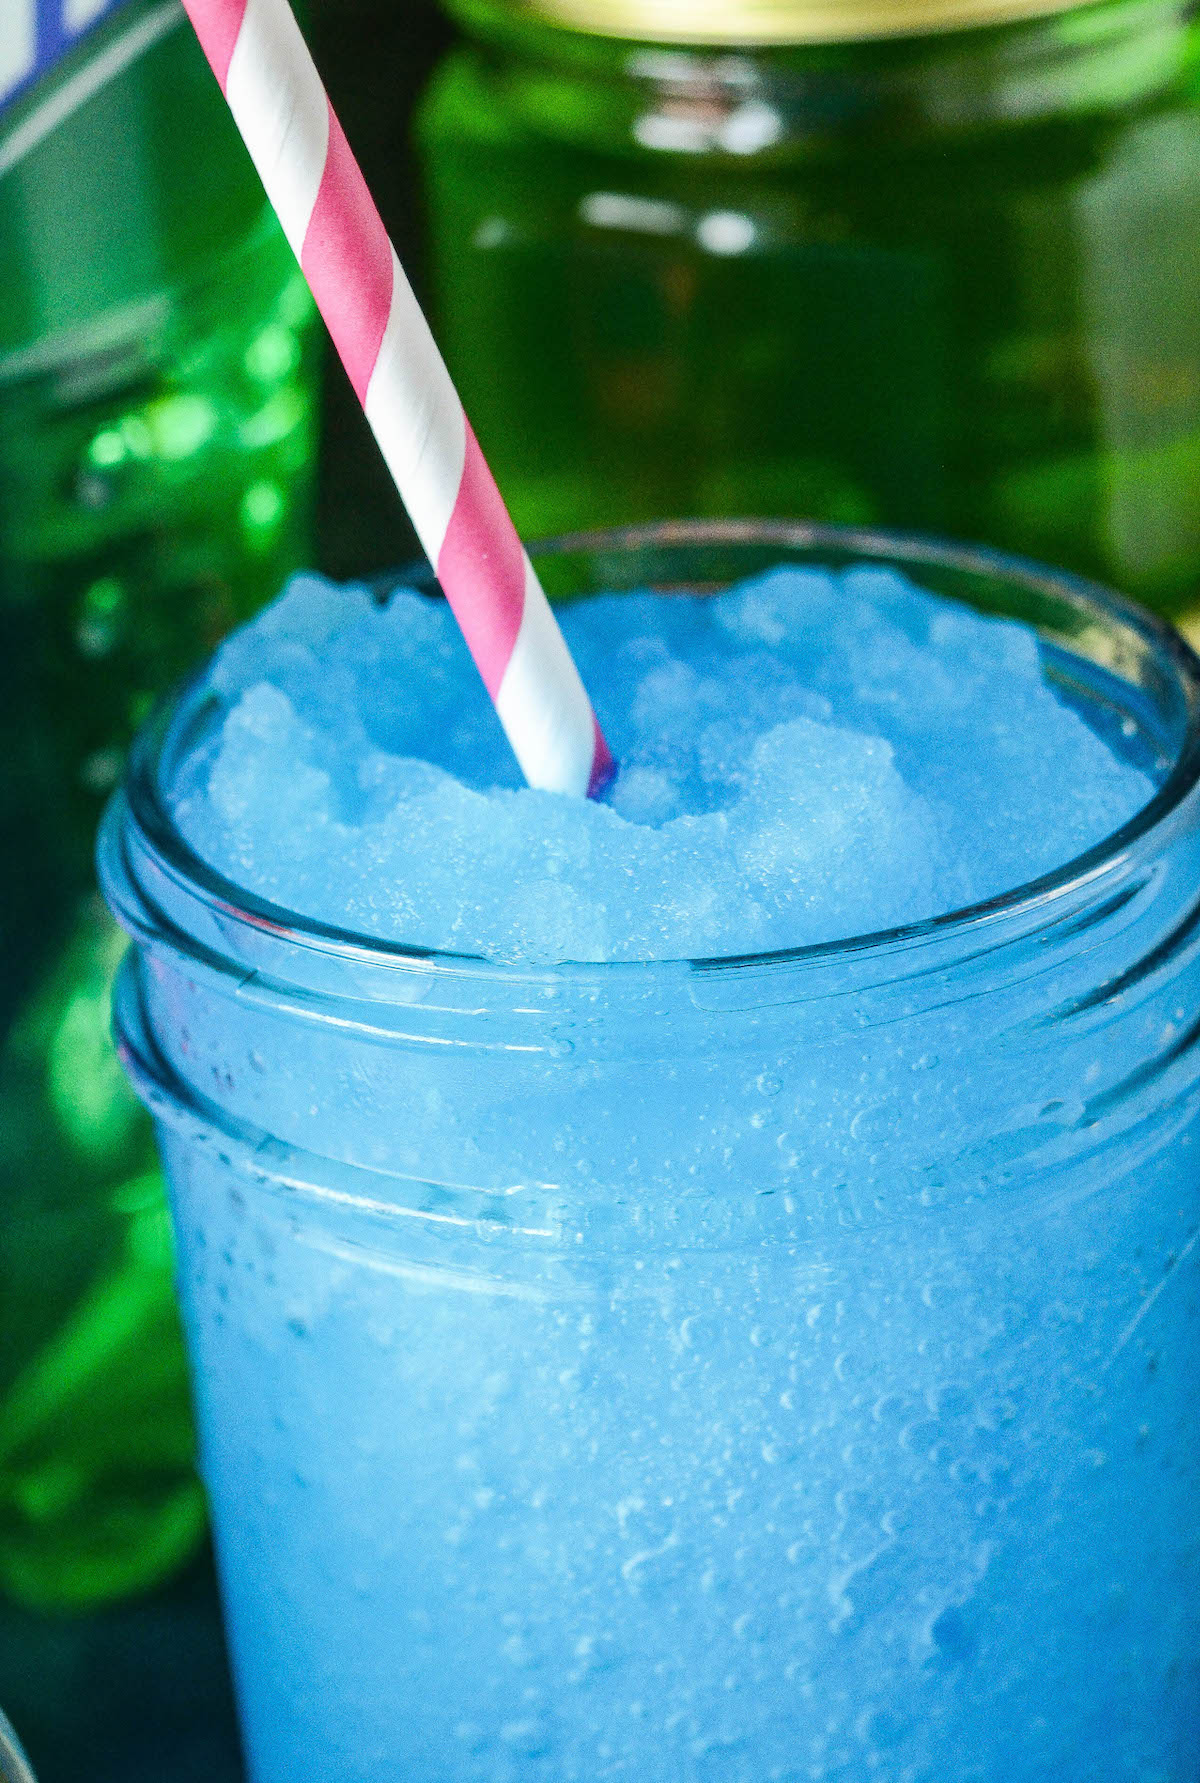 Up close image of a blue boozy jolly rancher drink with a pink straw.